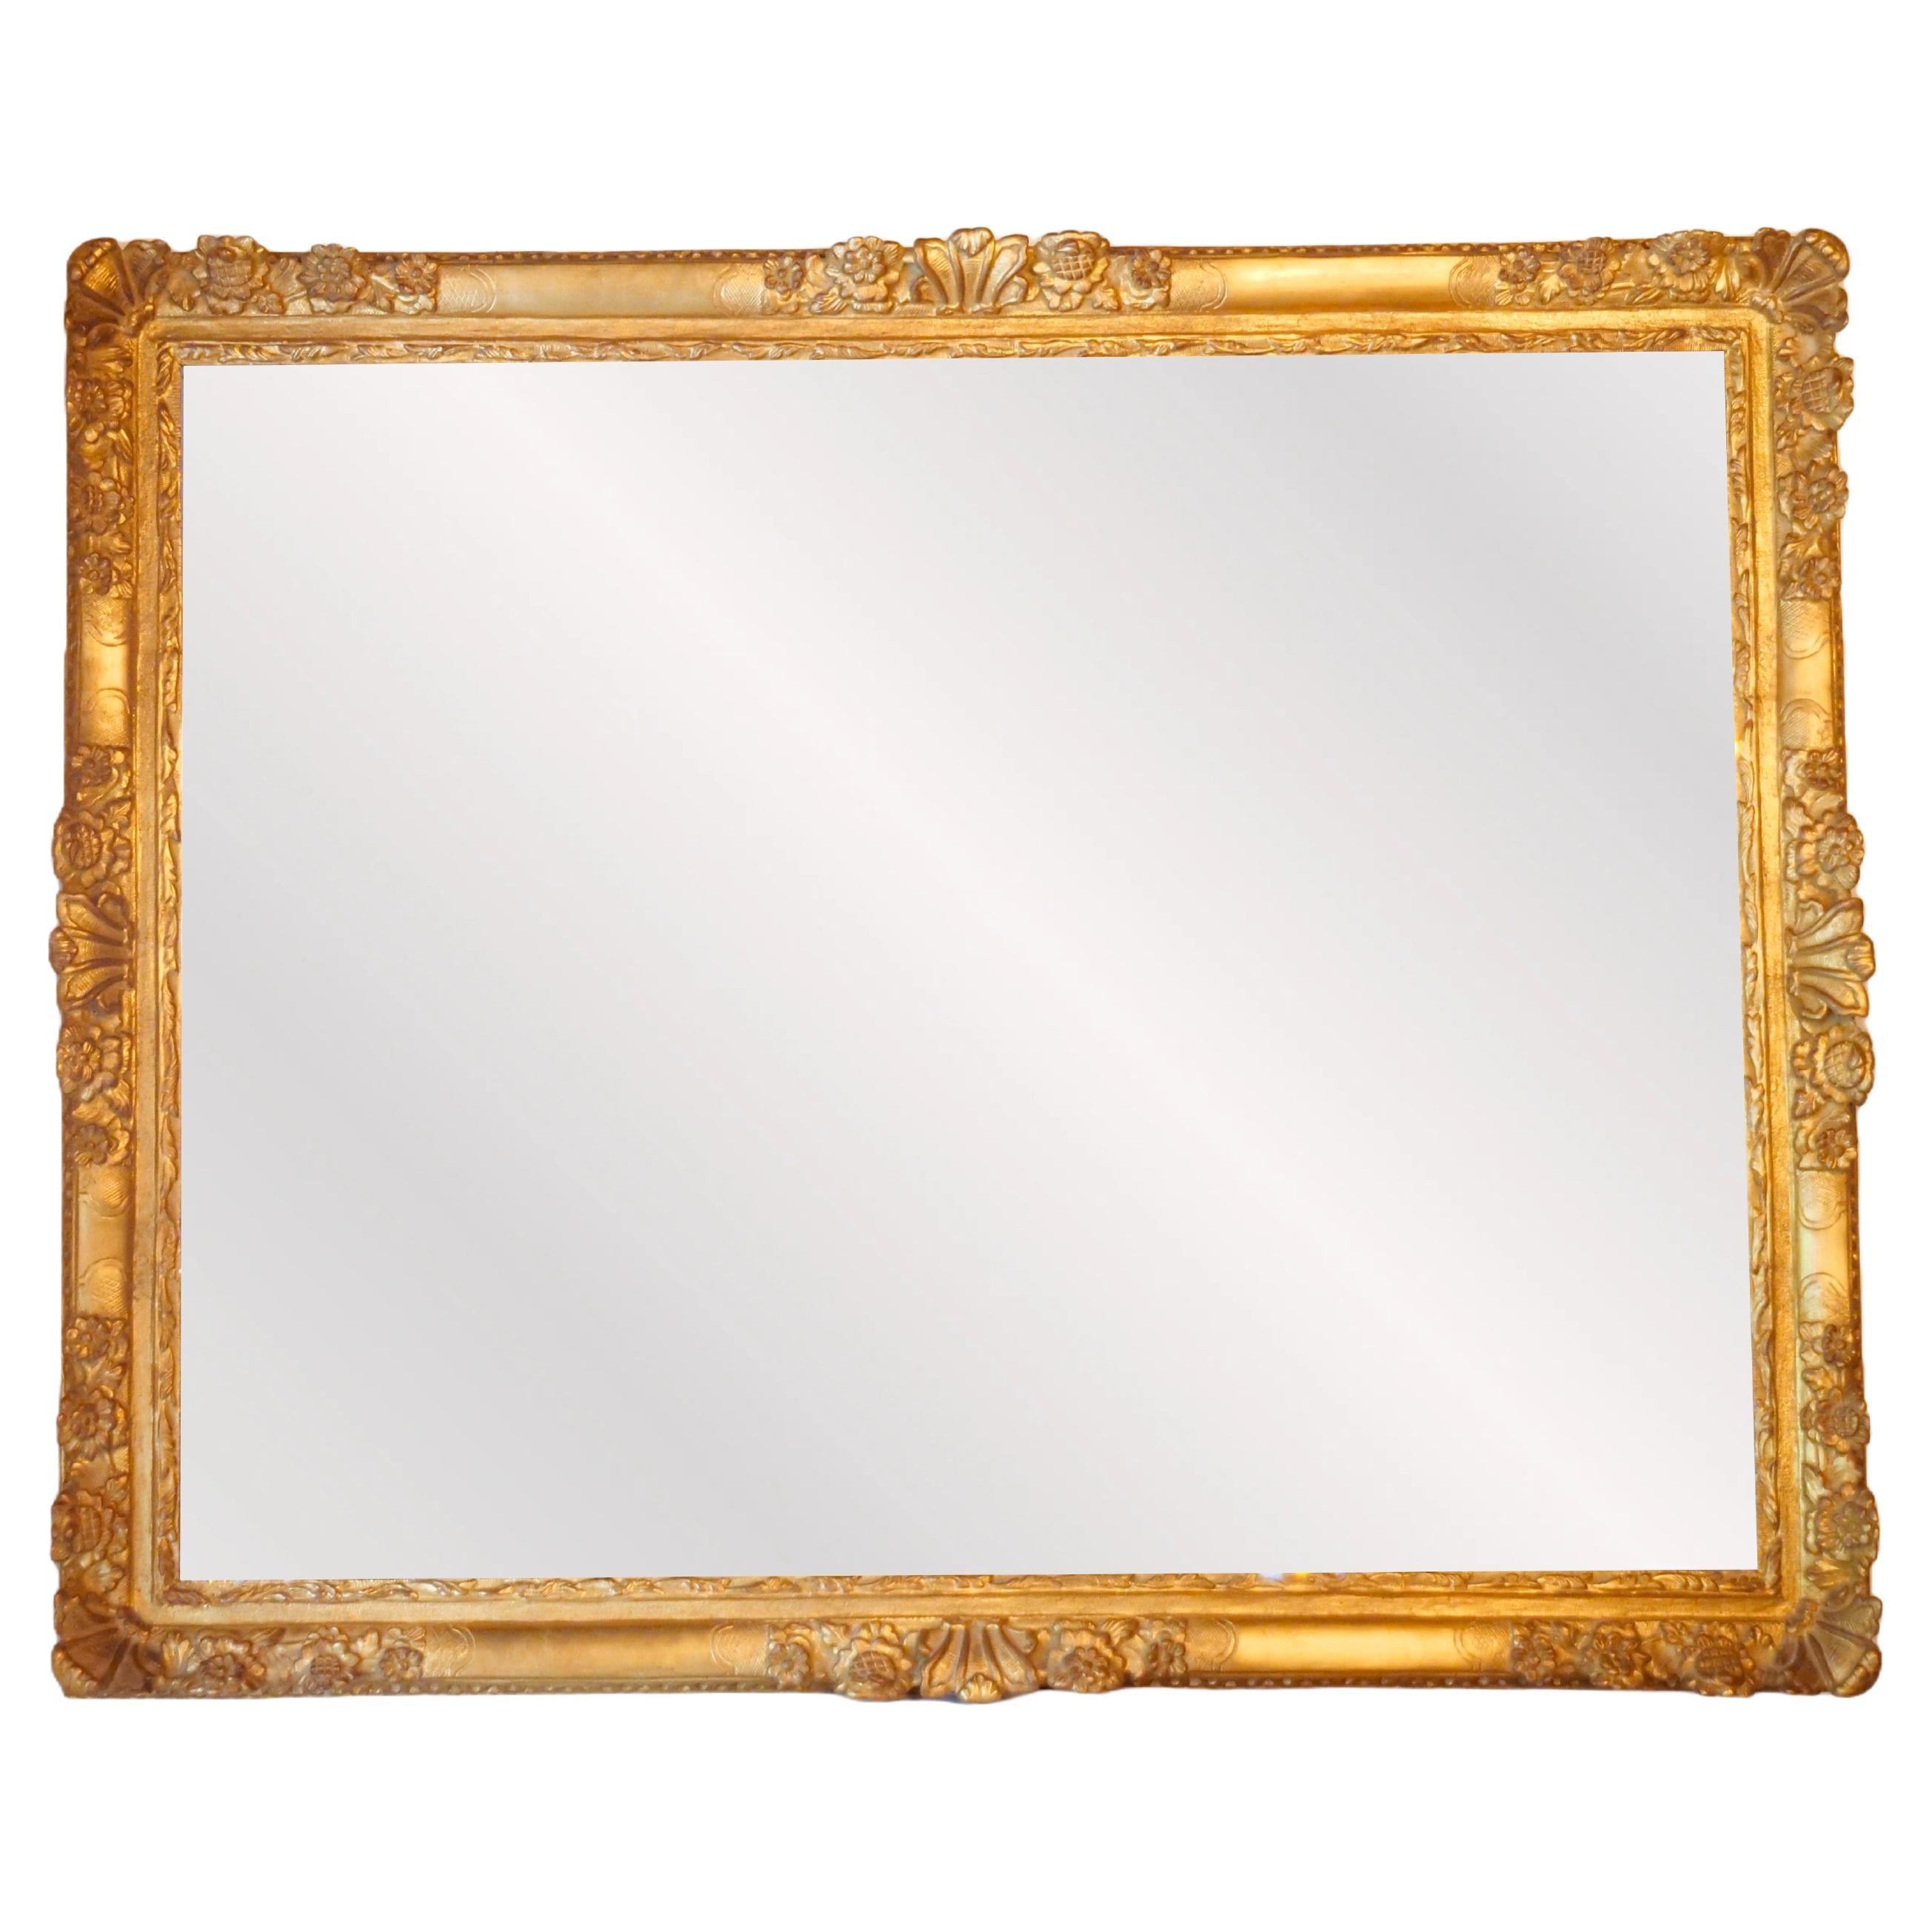 Exceptional French Giltwood Frame Rectangular Shape Hanging Wall Mirror For Sale